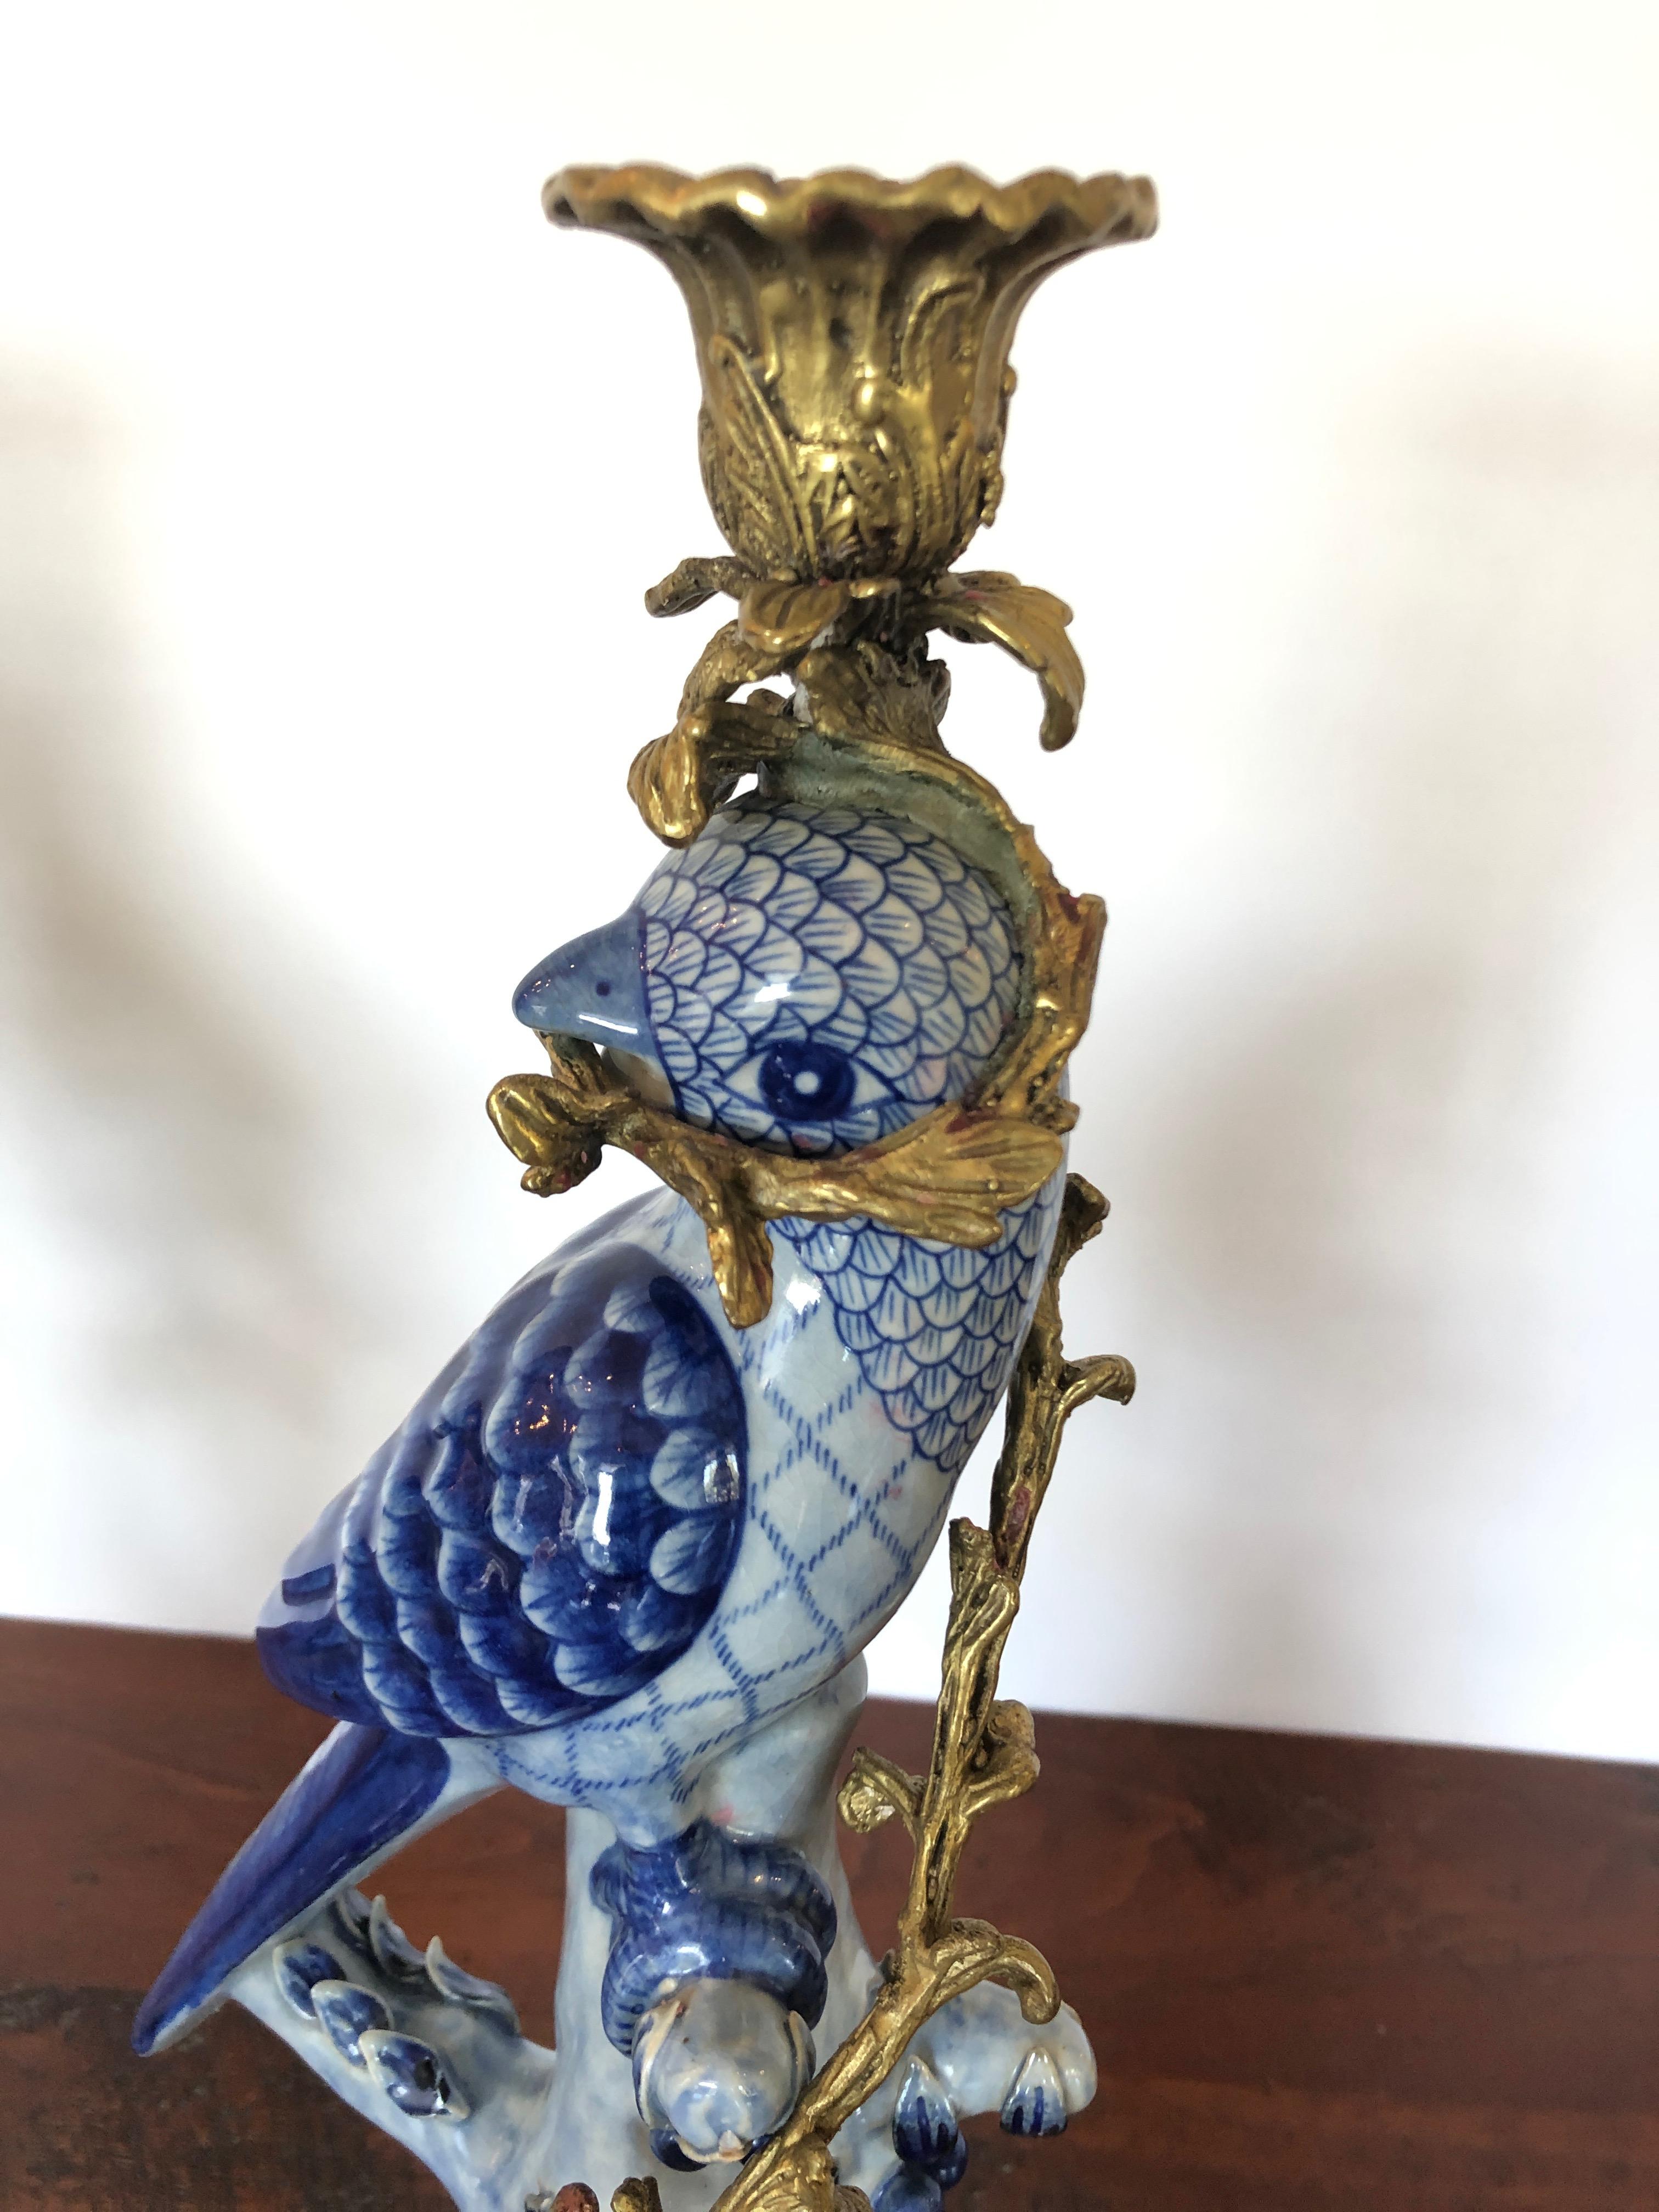 An incredible ornate pair of blue two tone porcelain parrot candlesticks having bronze bases, candle cups and faux bois vines around the body of the objects.